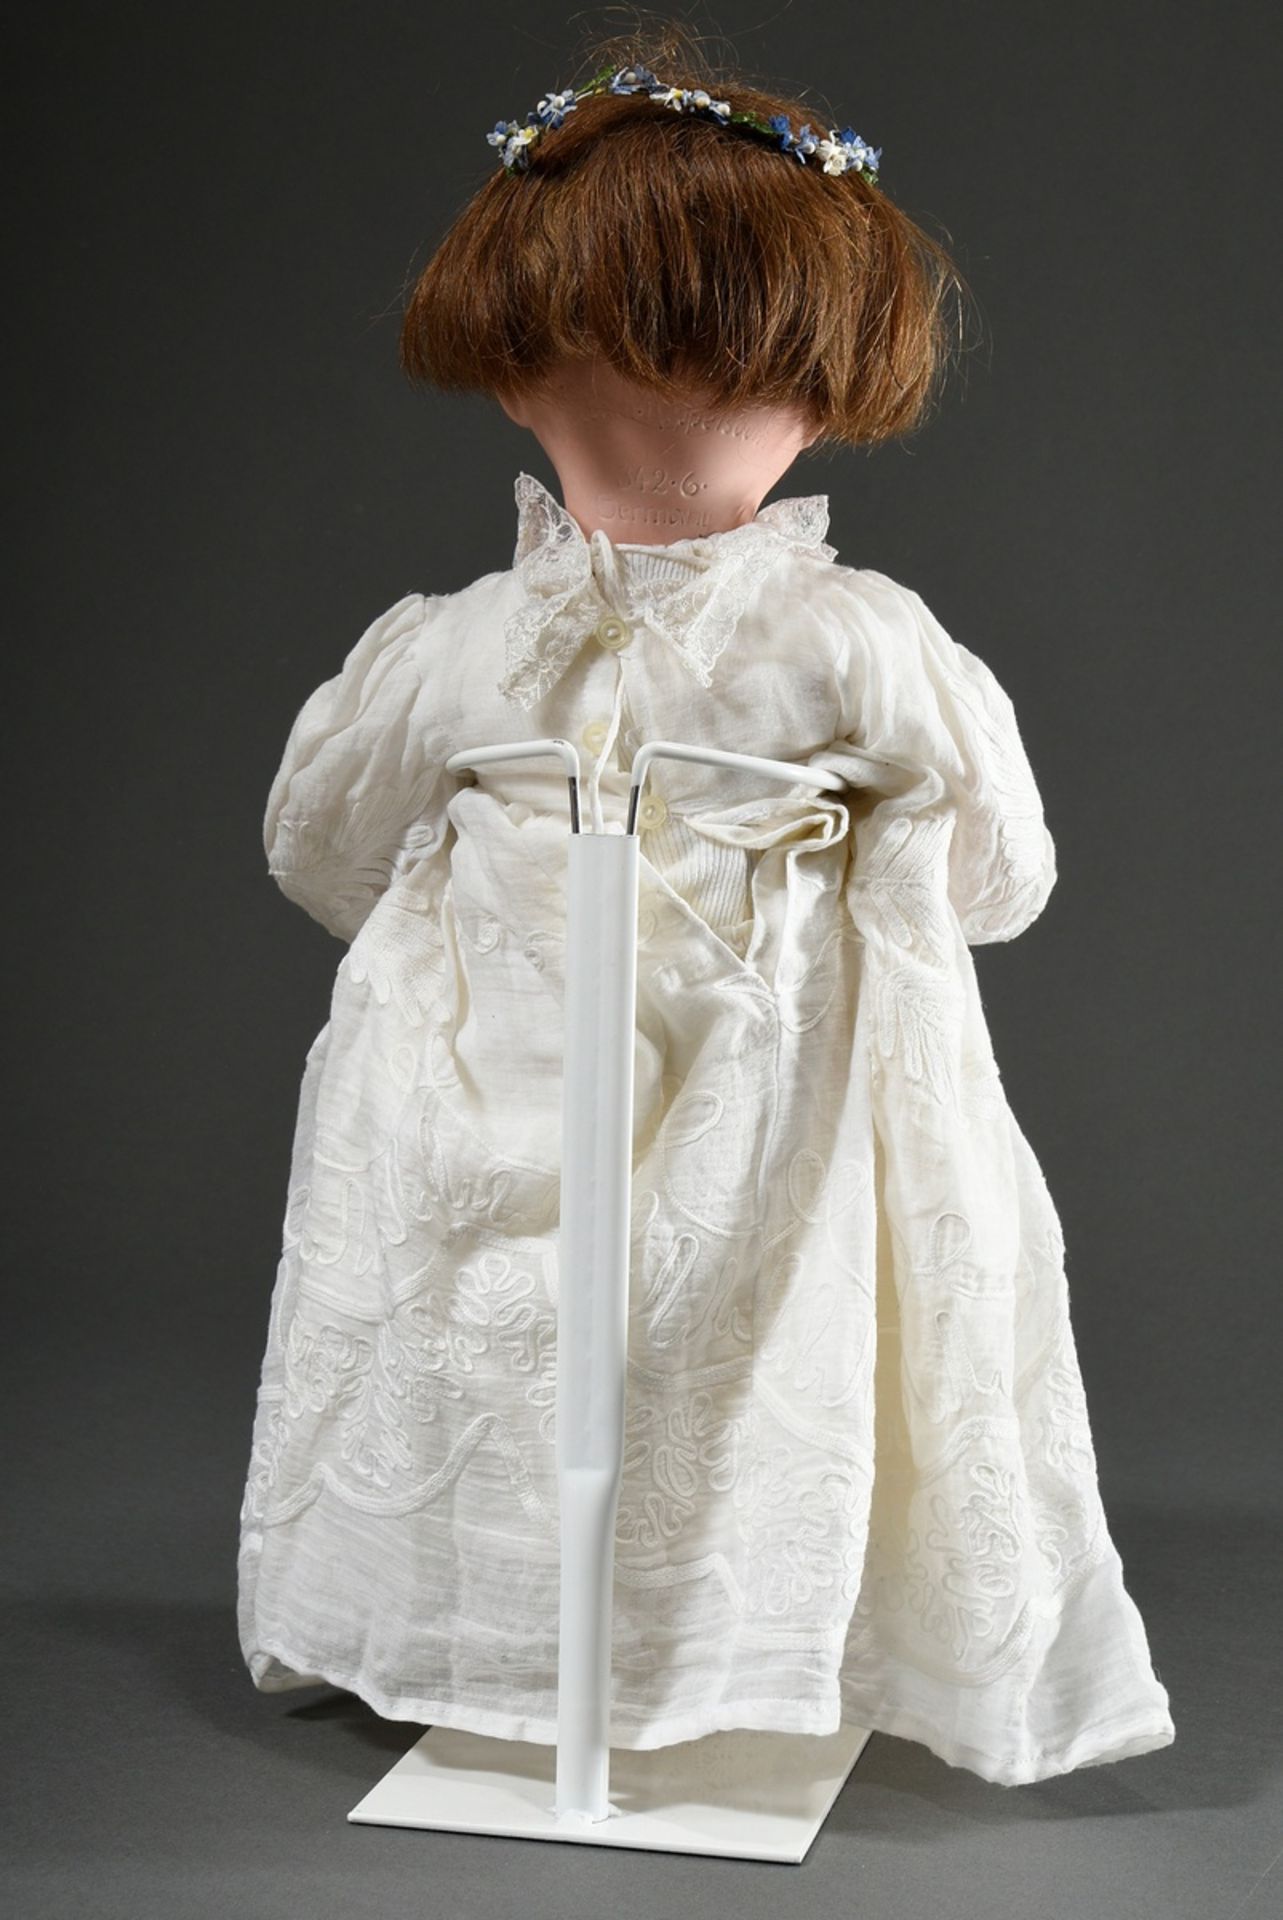 Ernst Heubach doll with bisque porcelain crank head, blue sleeping eyes, painted eyelashes, open mo - Image 2 of 4